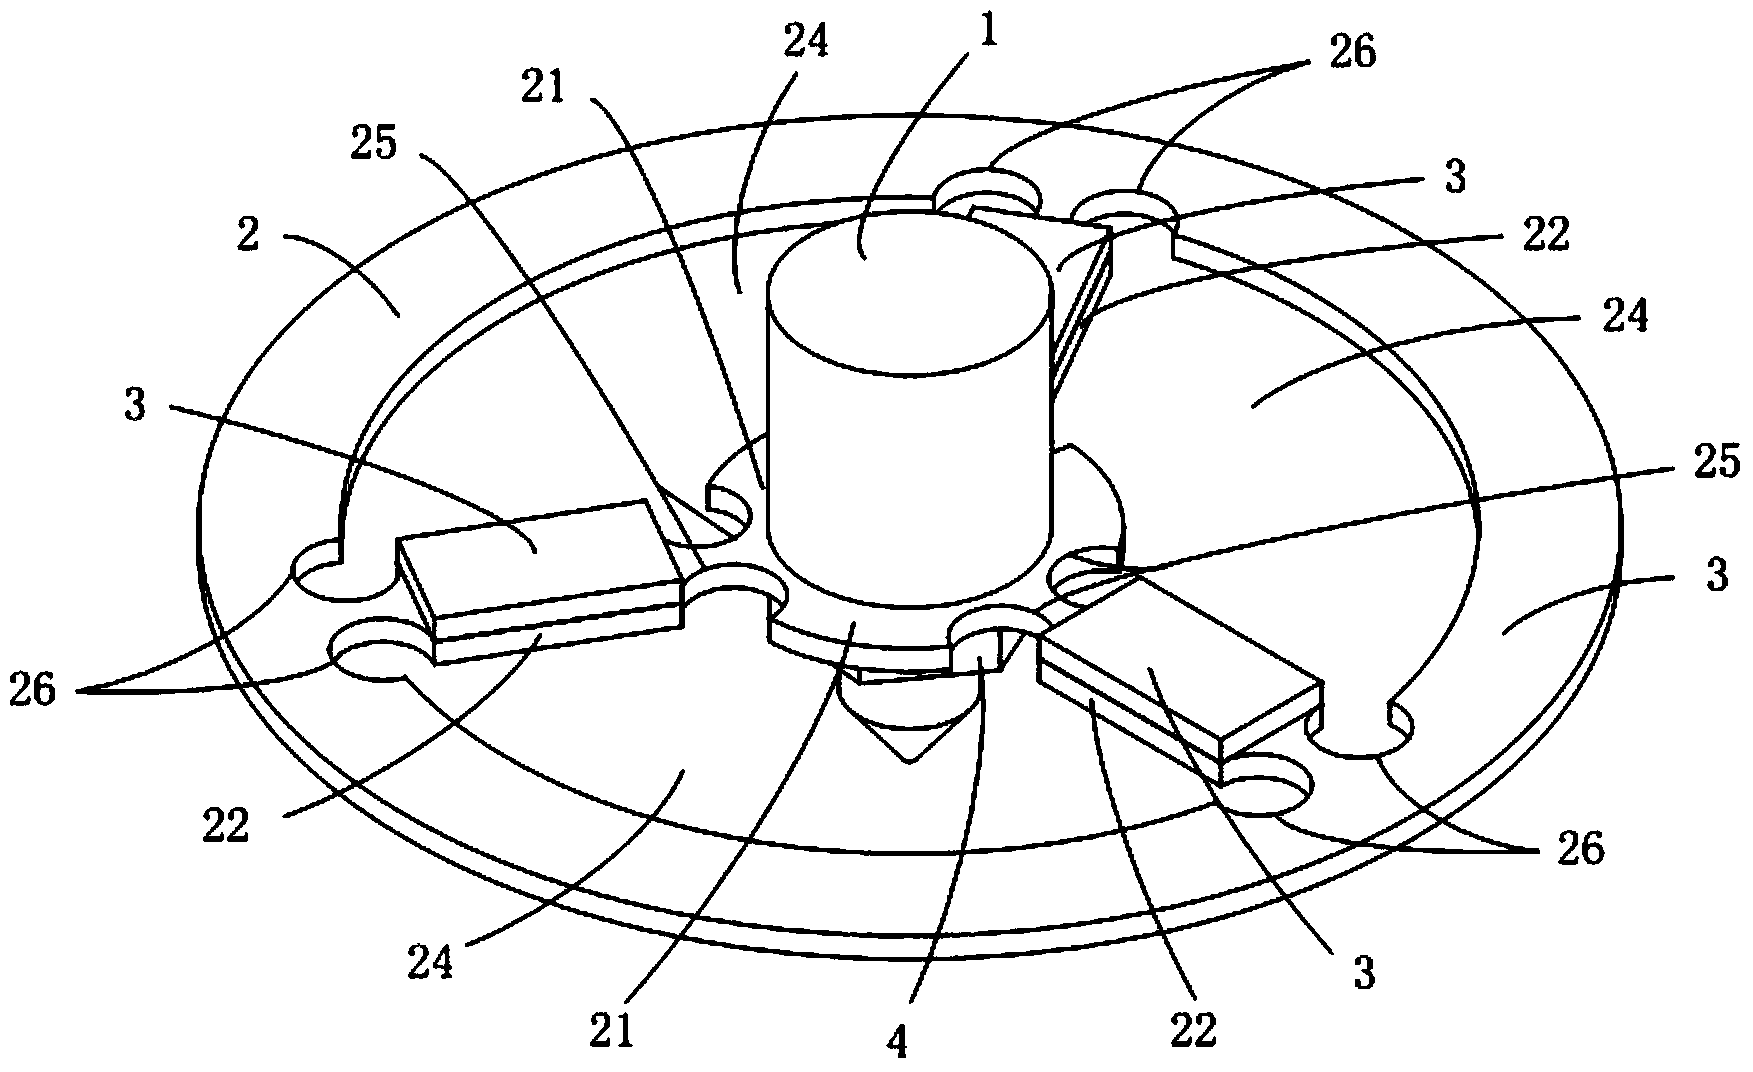 Piezoelectrically-driven spraying direction flexible adjustment device